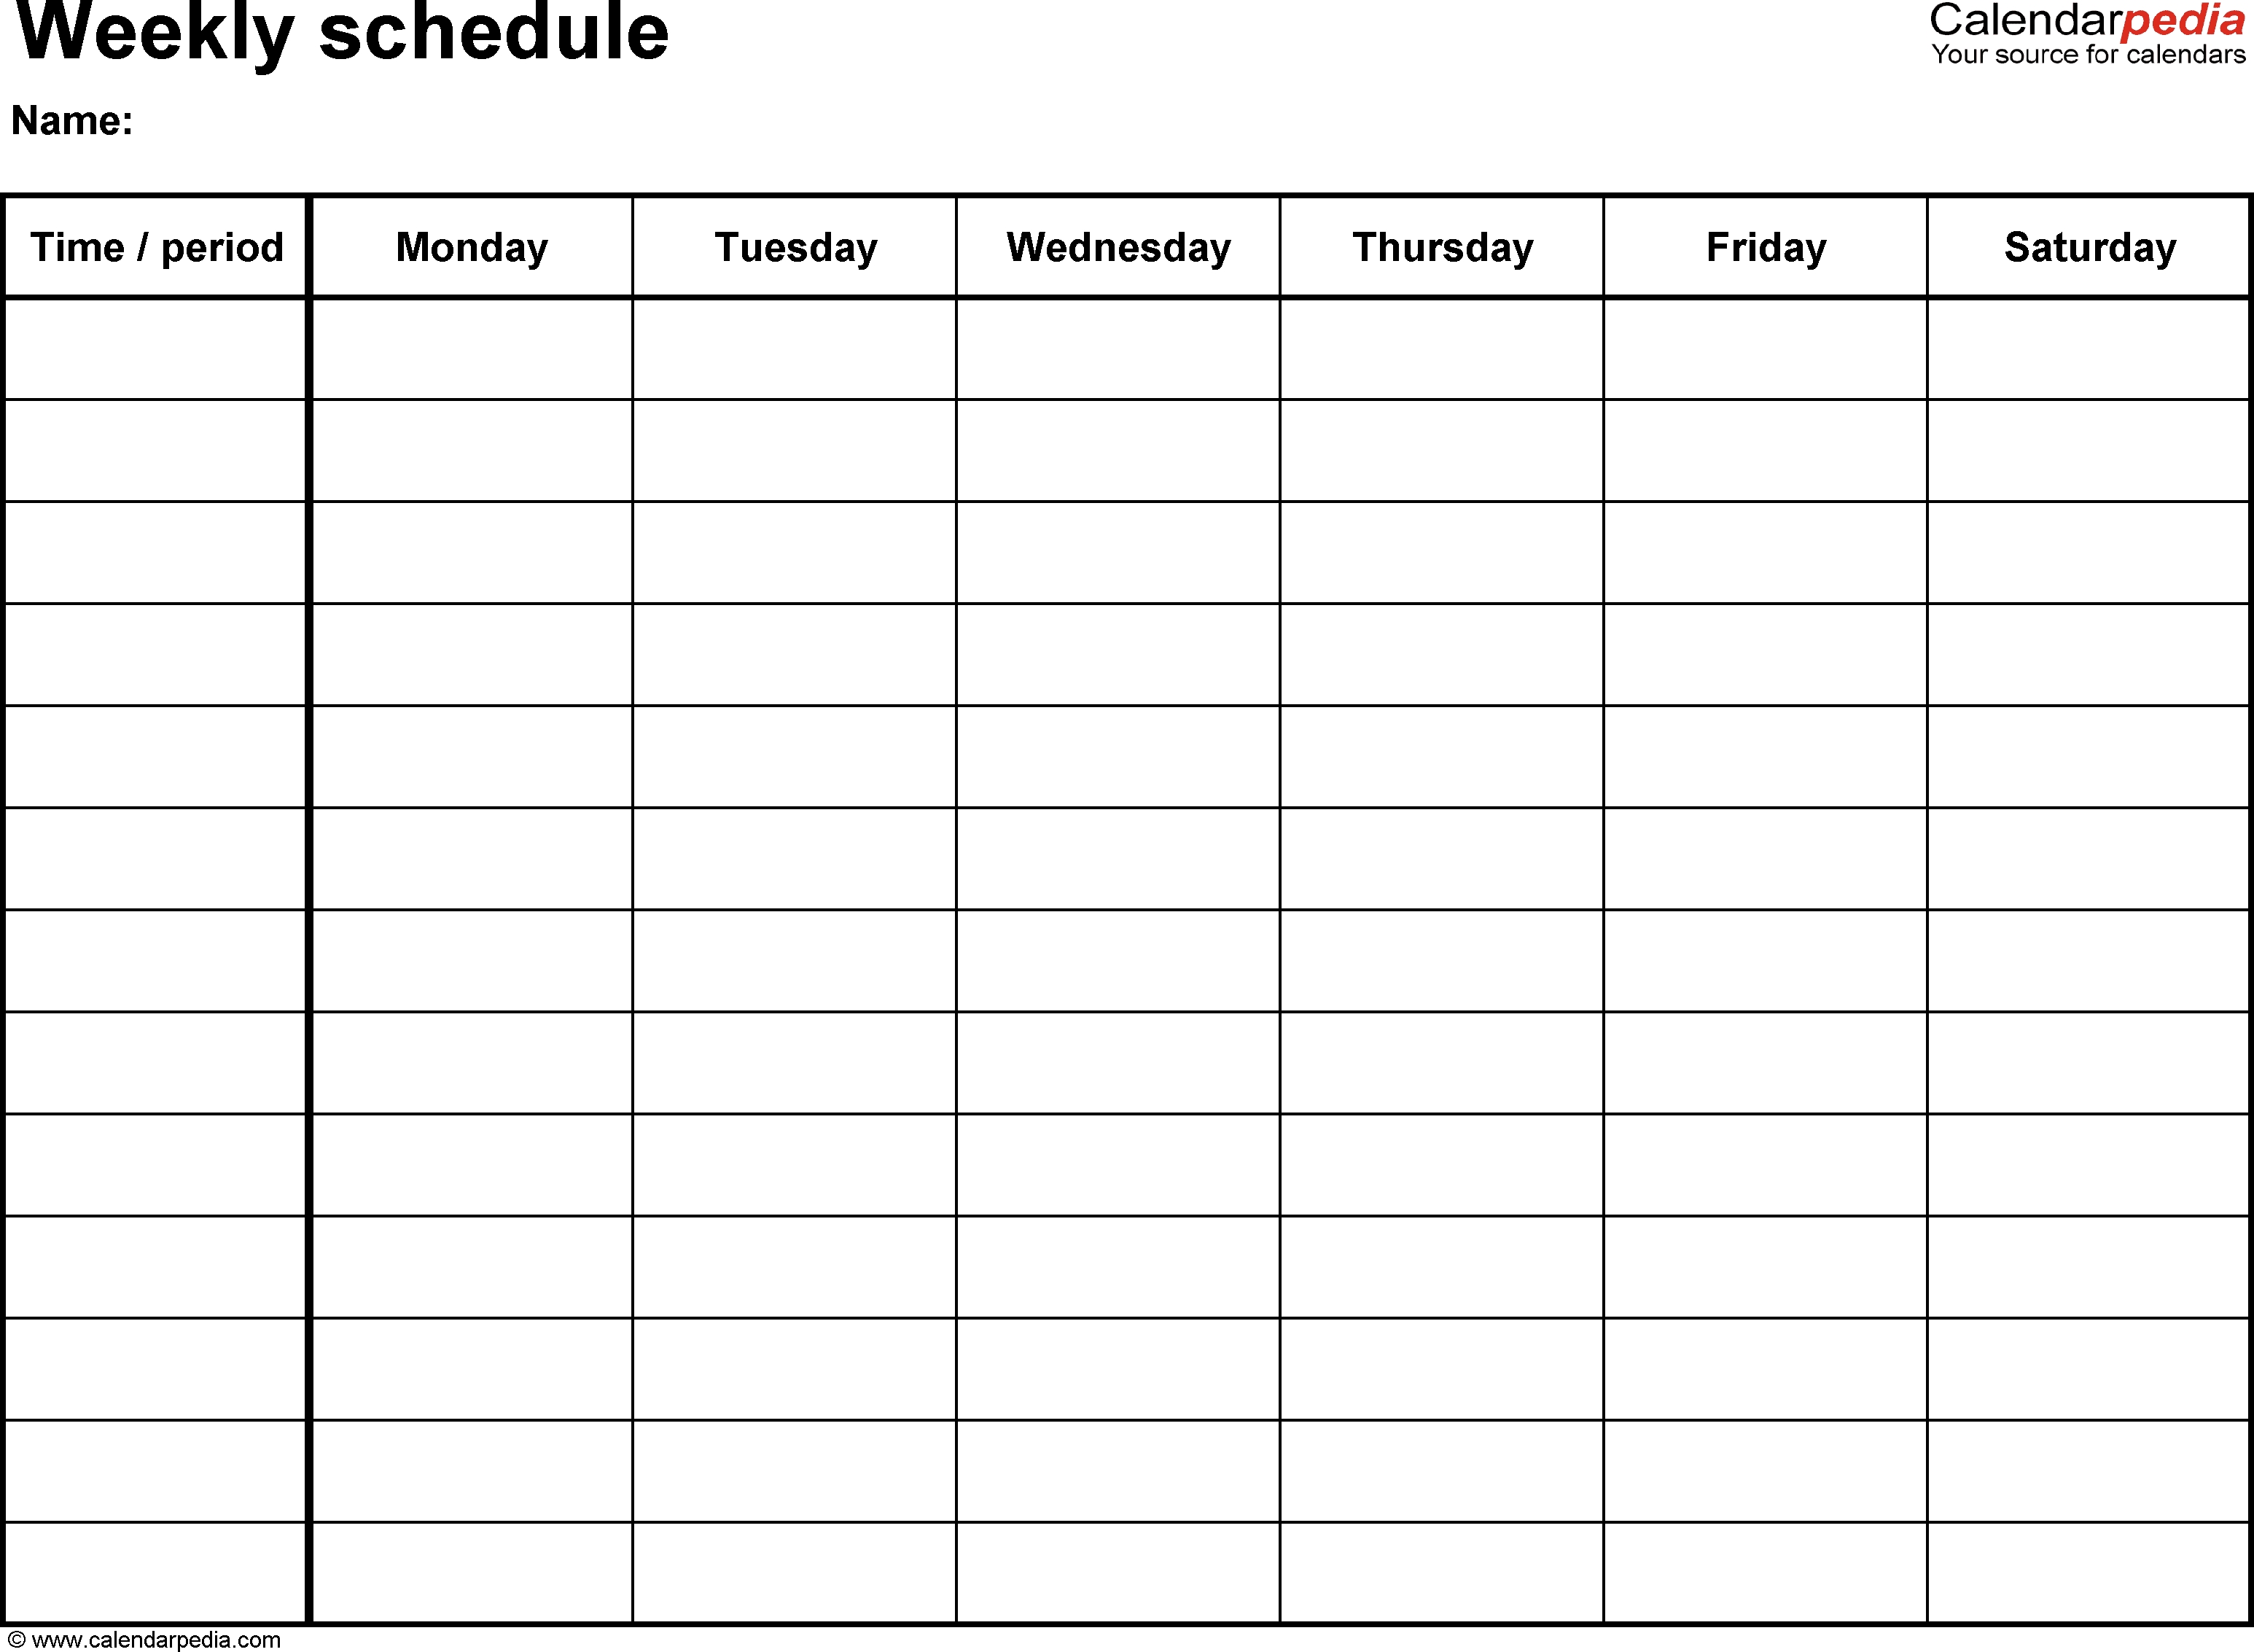 Free Weekly Schedule Templates For Word - 18 Templates in Free Printable Blank Employee Schedules